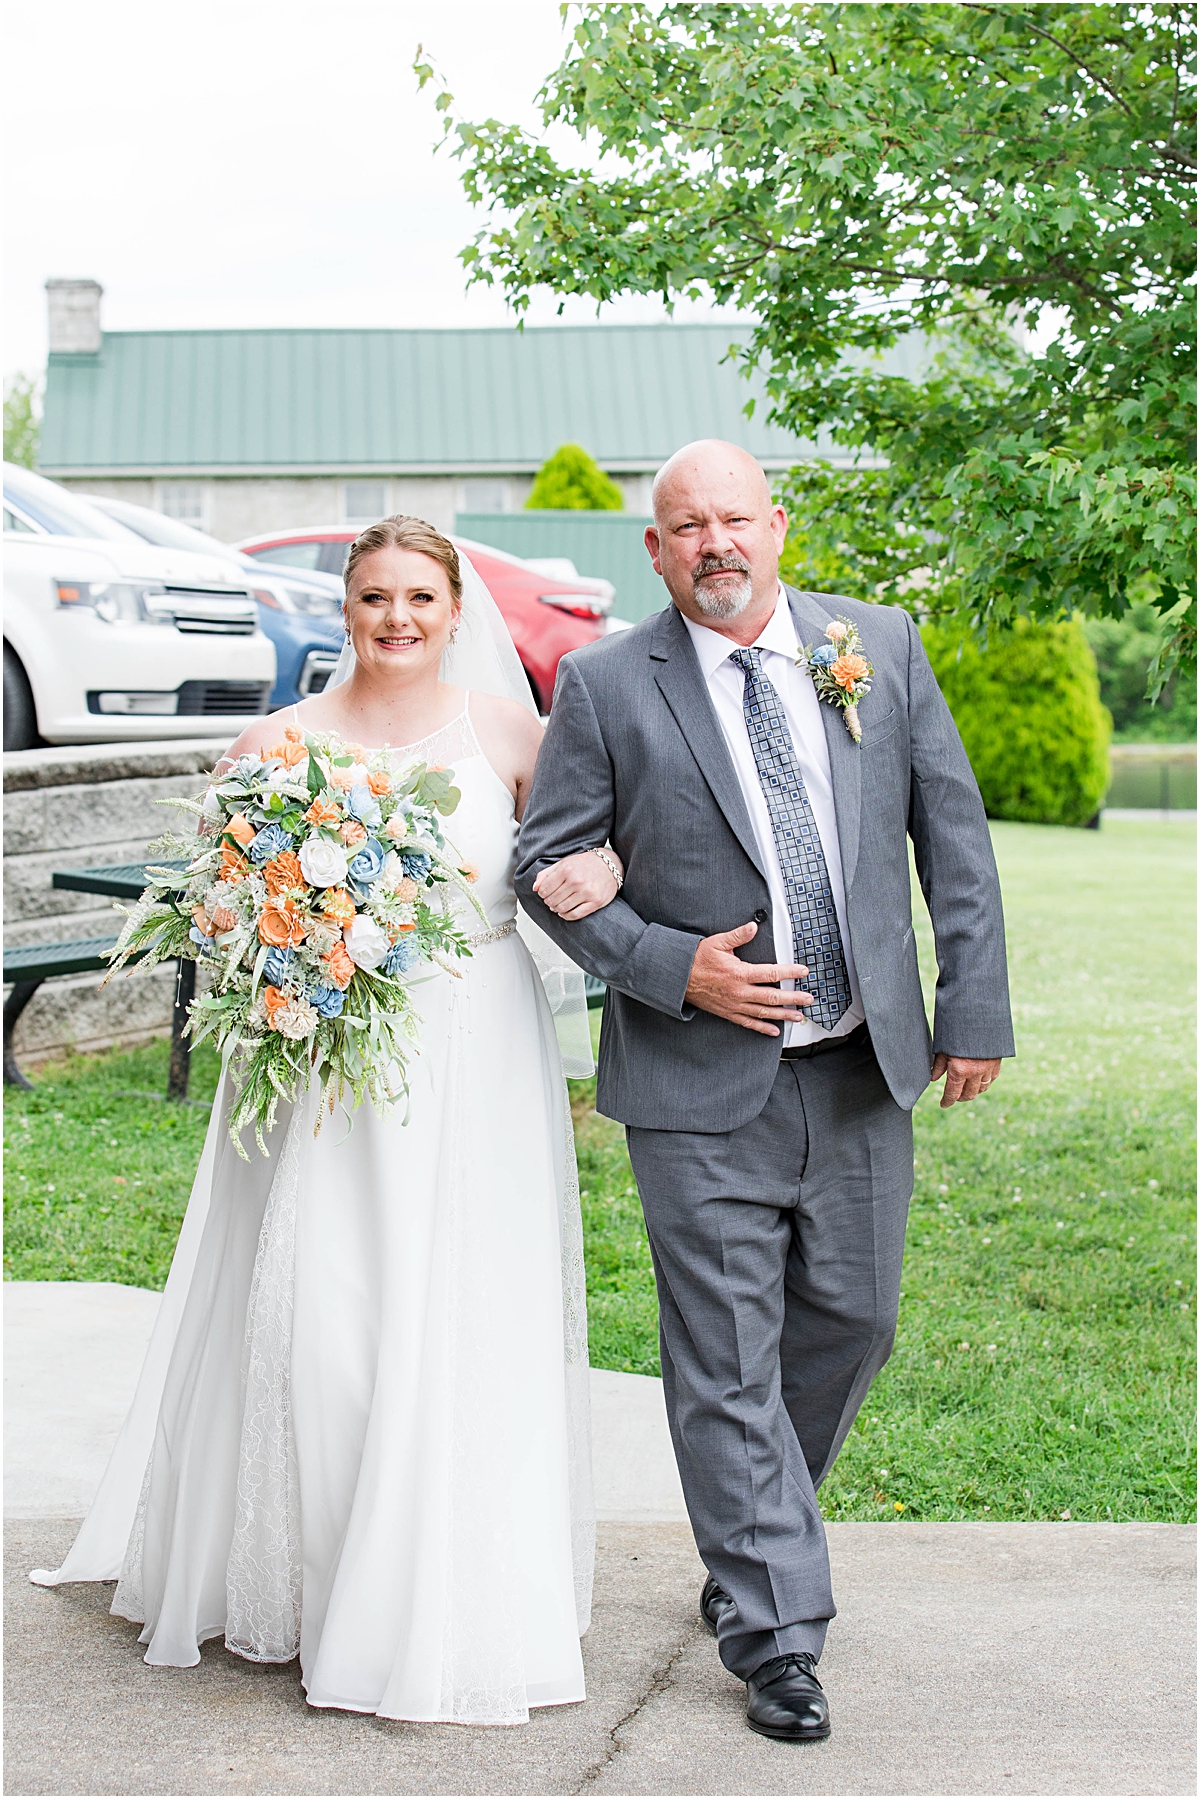 Anneliese and her dad waiting to walk down the aisle on her wedding day at Poor Farm House Park.